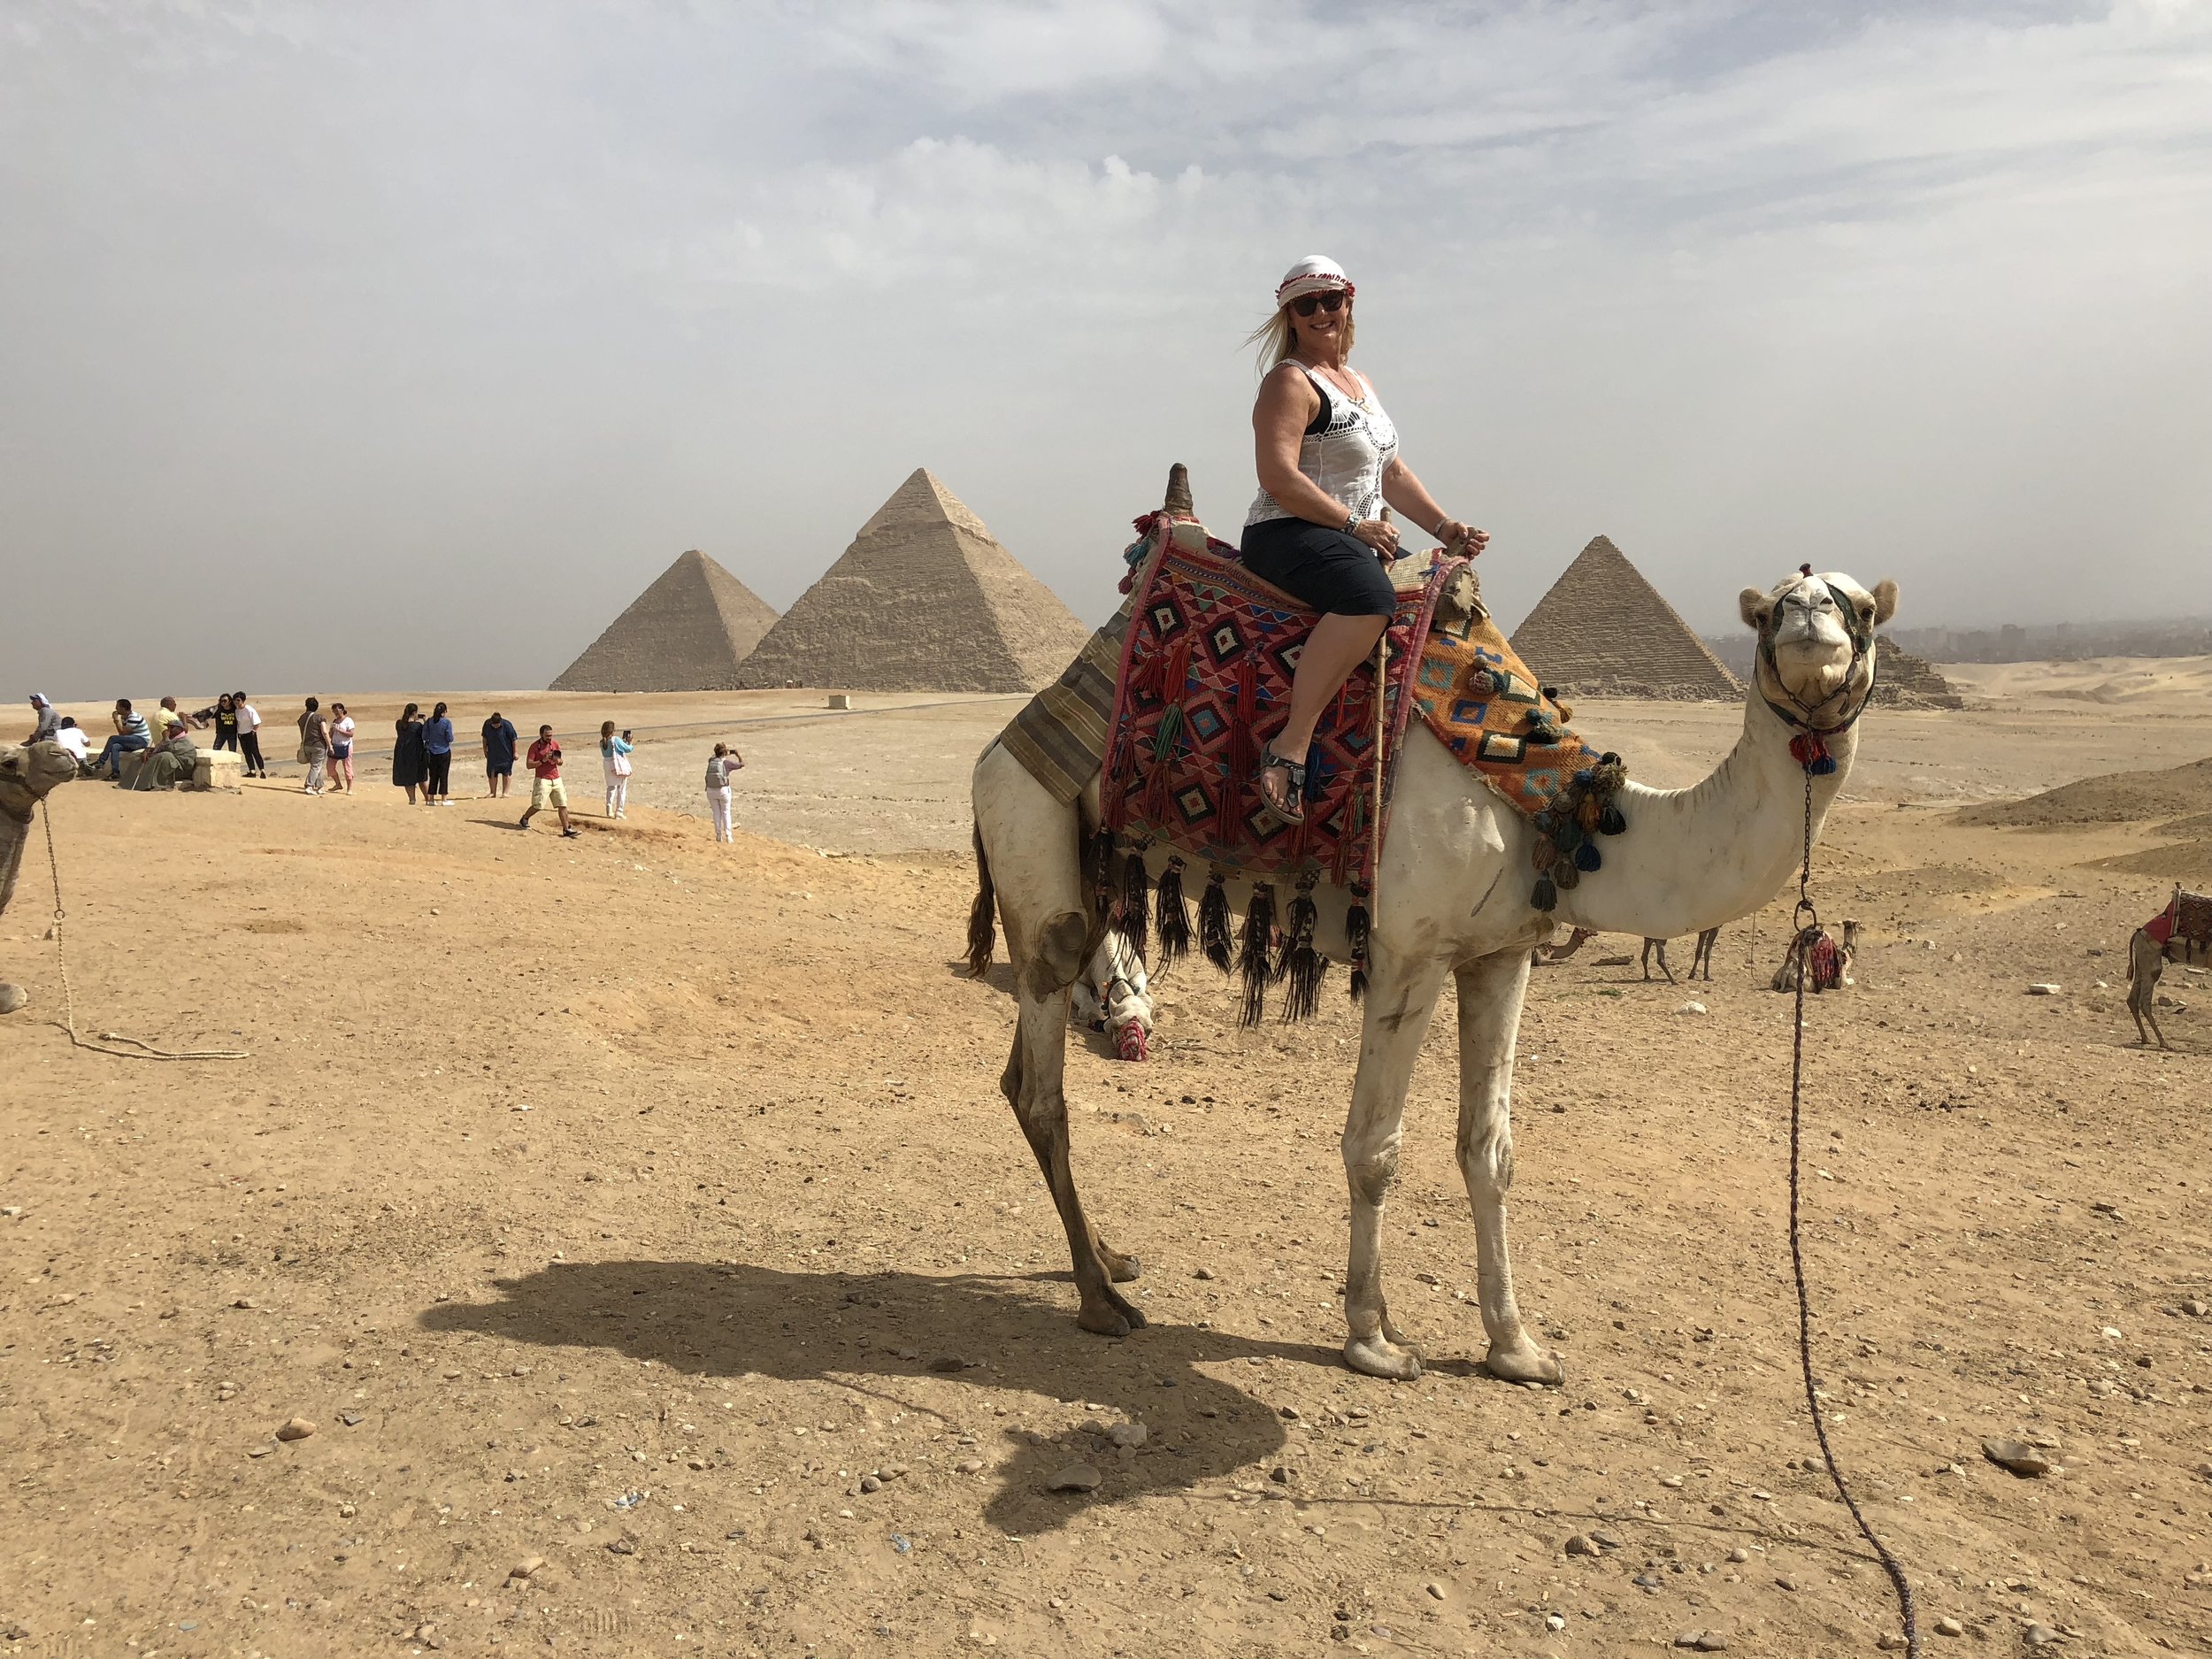 My adventure and fascination with camel rides Egypt